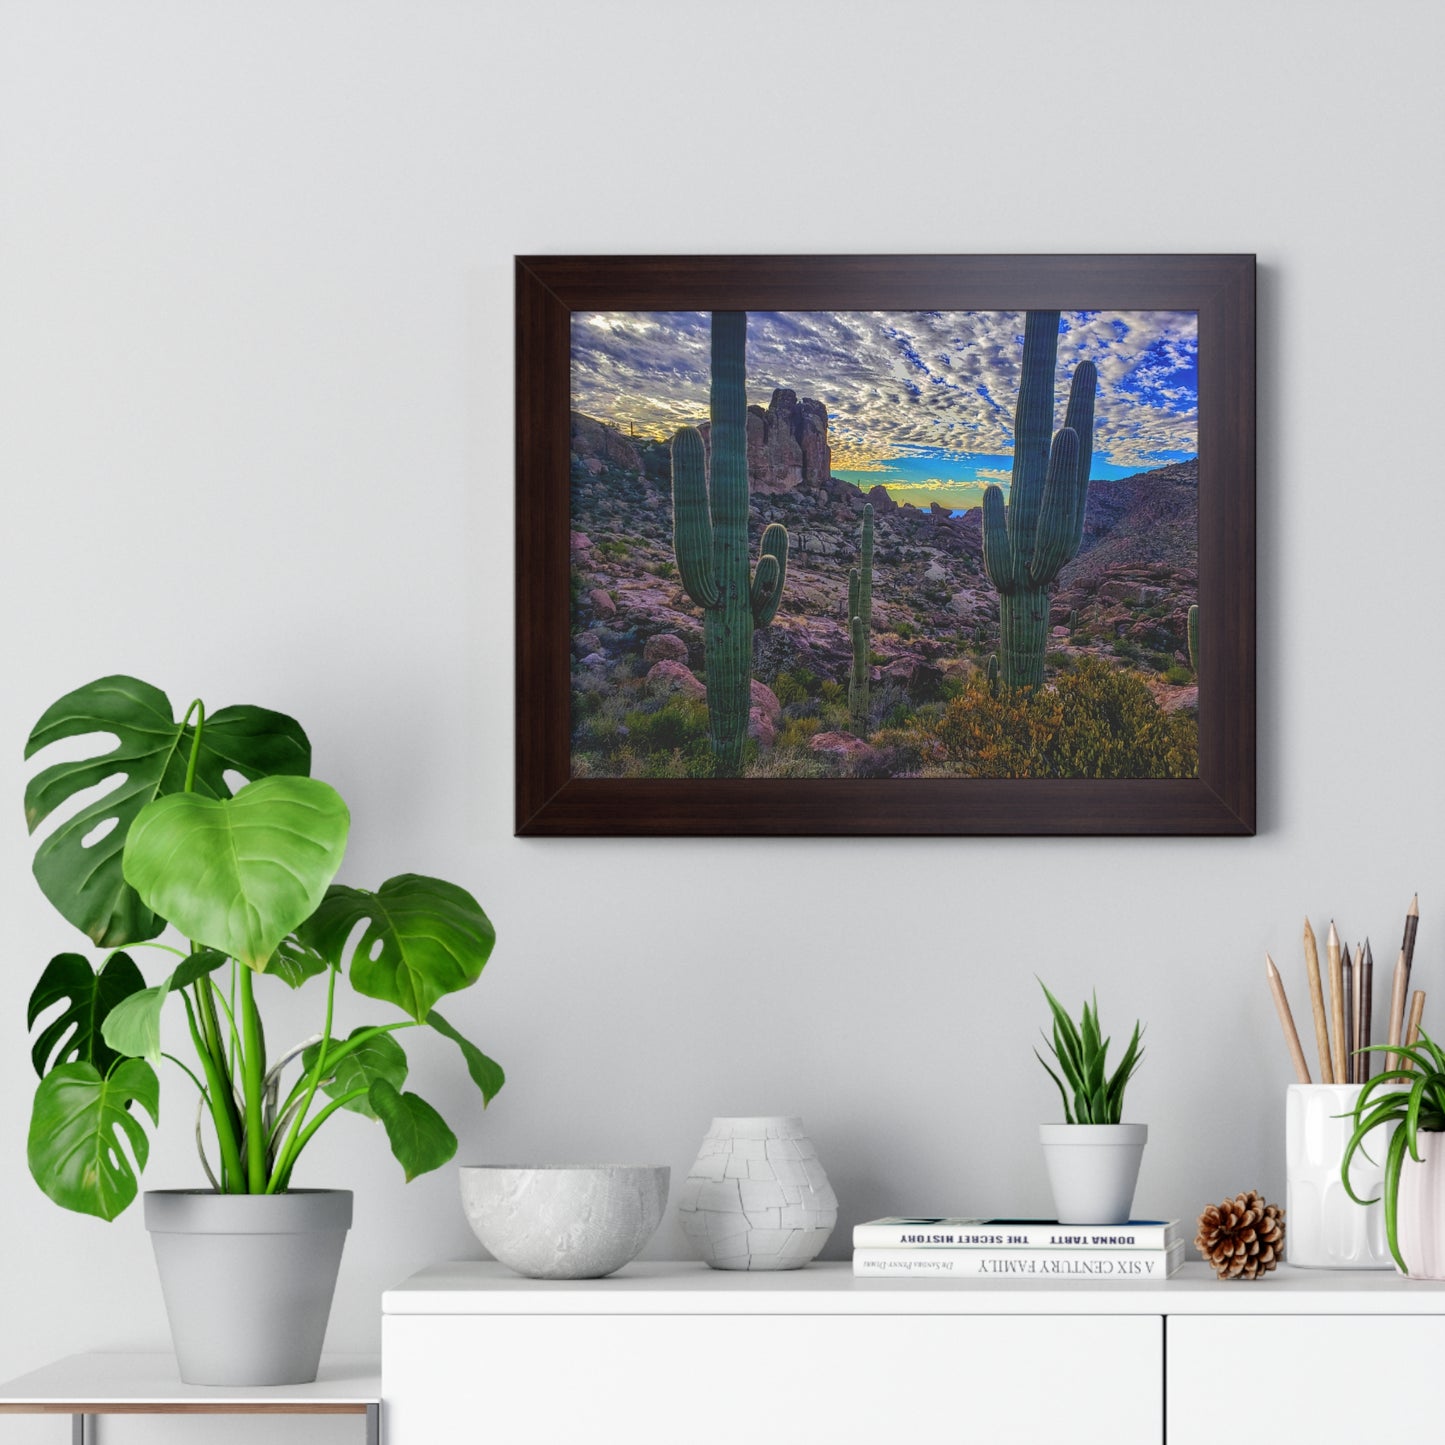 Framed Desert Photography: Mountaintop Saguaros; Arizona Photography, Wall Art, Natural Landscape Home Decor for Hikers and Nature Lovers!